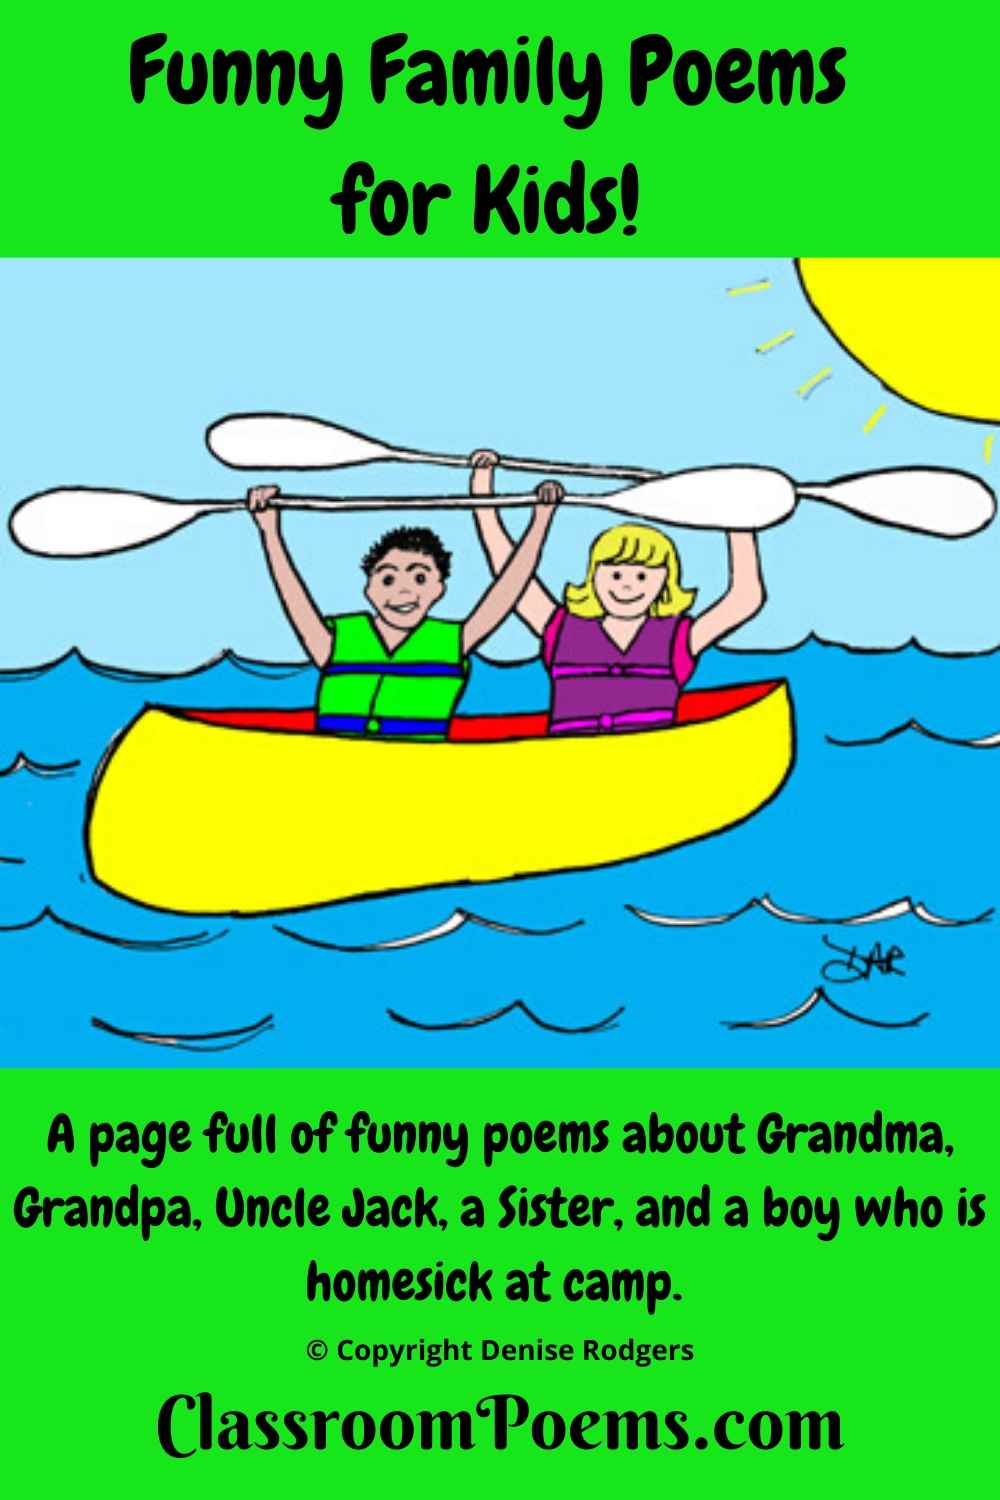 HOMESICK at summer camp, a funny family poem by Denise Rodgers at ClassroomPoems.com.